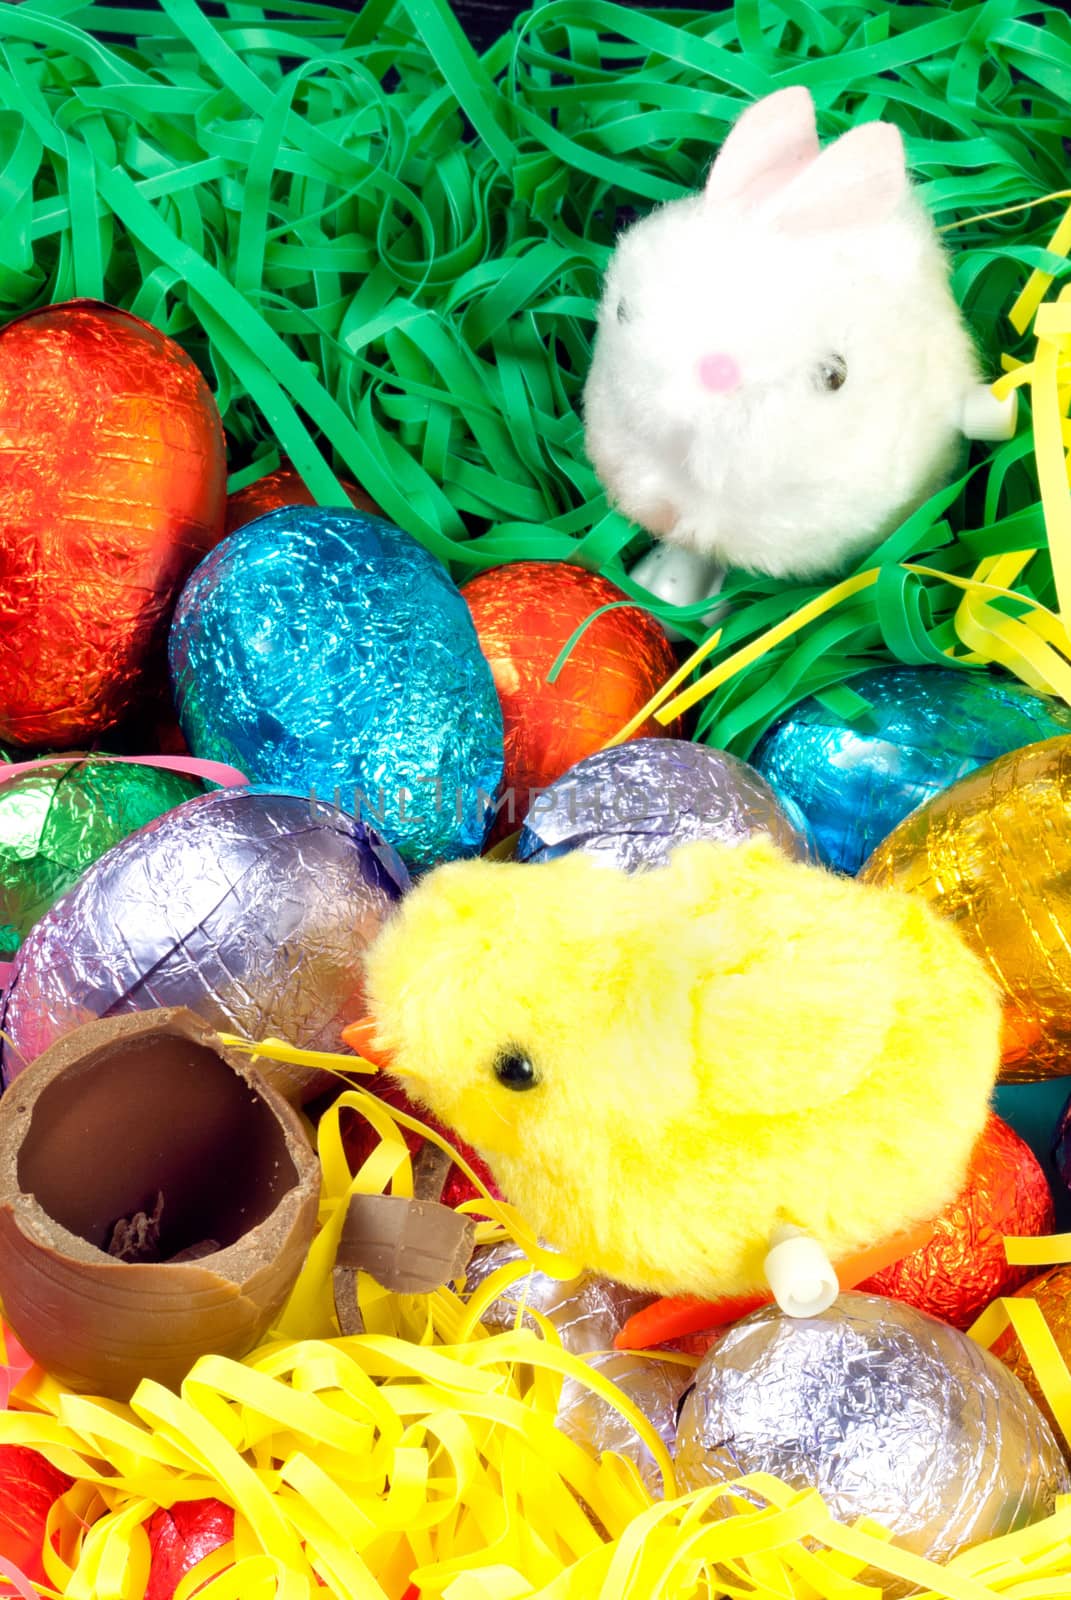 Close-up of a fluffy yellow chick racing a fluffy white bunny over a pile of colorful eggs and grasses to a chocolate egg.